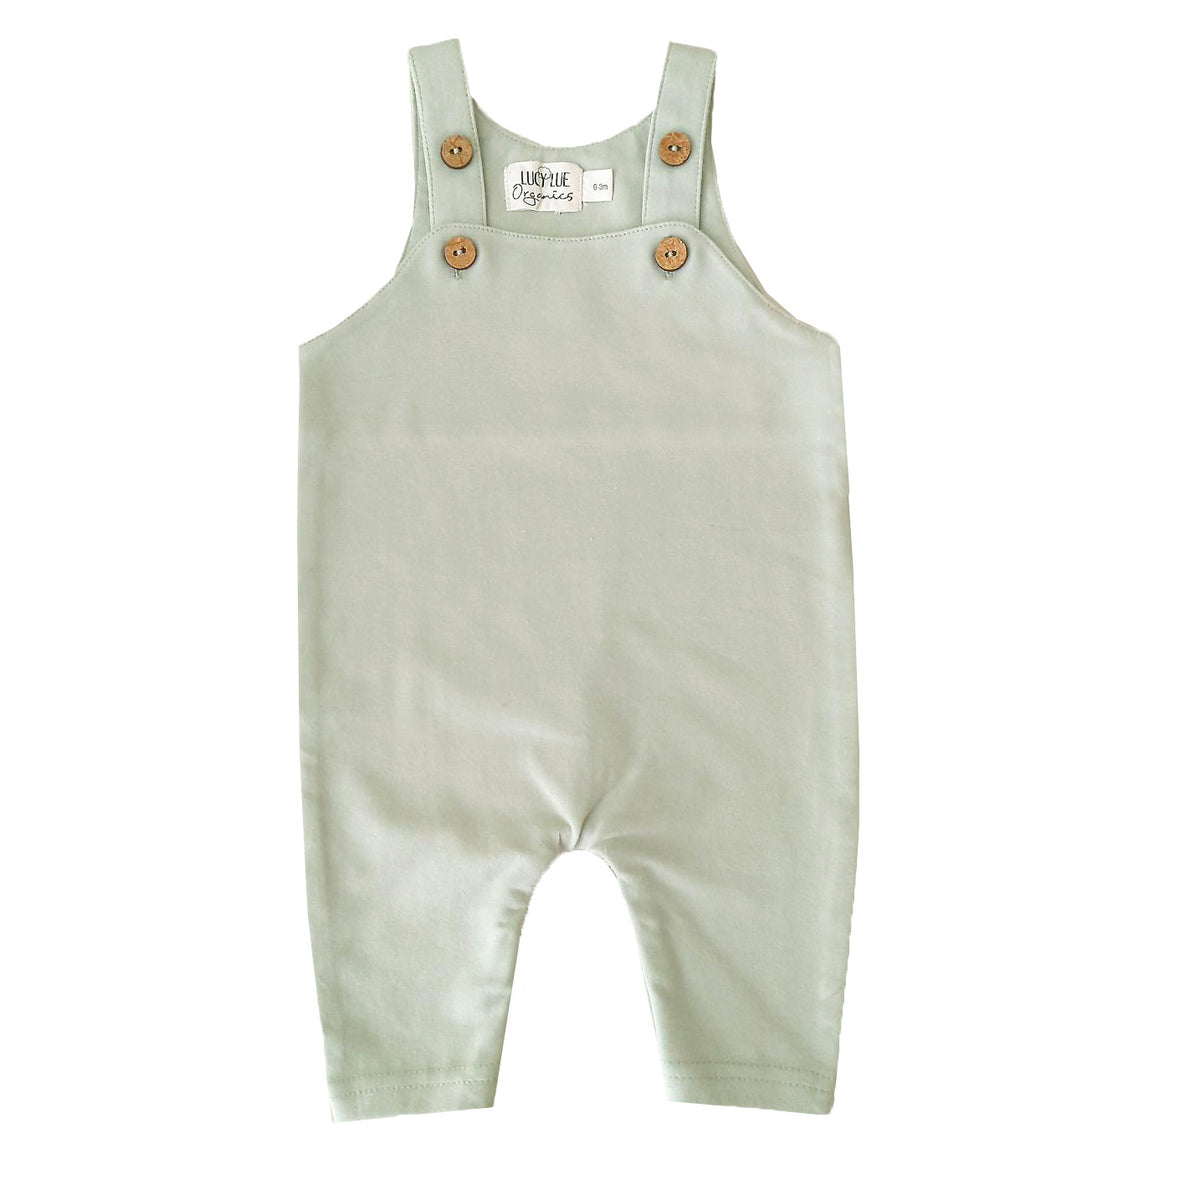 Baby overalls. Newborn jumpsuit. Baby dungarees. Organic baby clothing. Lucy Lue Organics. Sage baby clothing